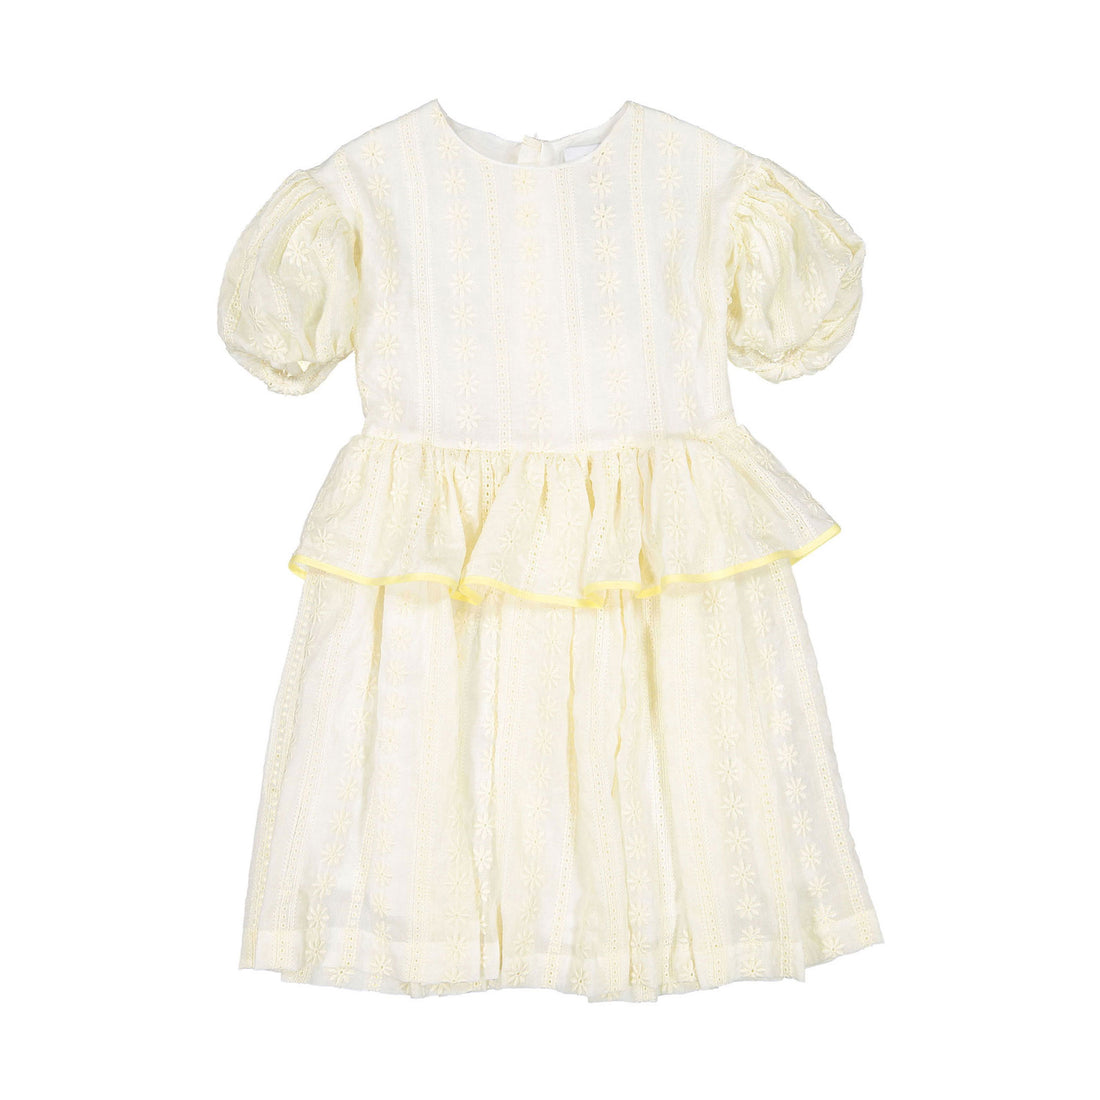 The Middle Daughter Embroidered Butter Flower Pep Talk Dress